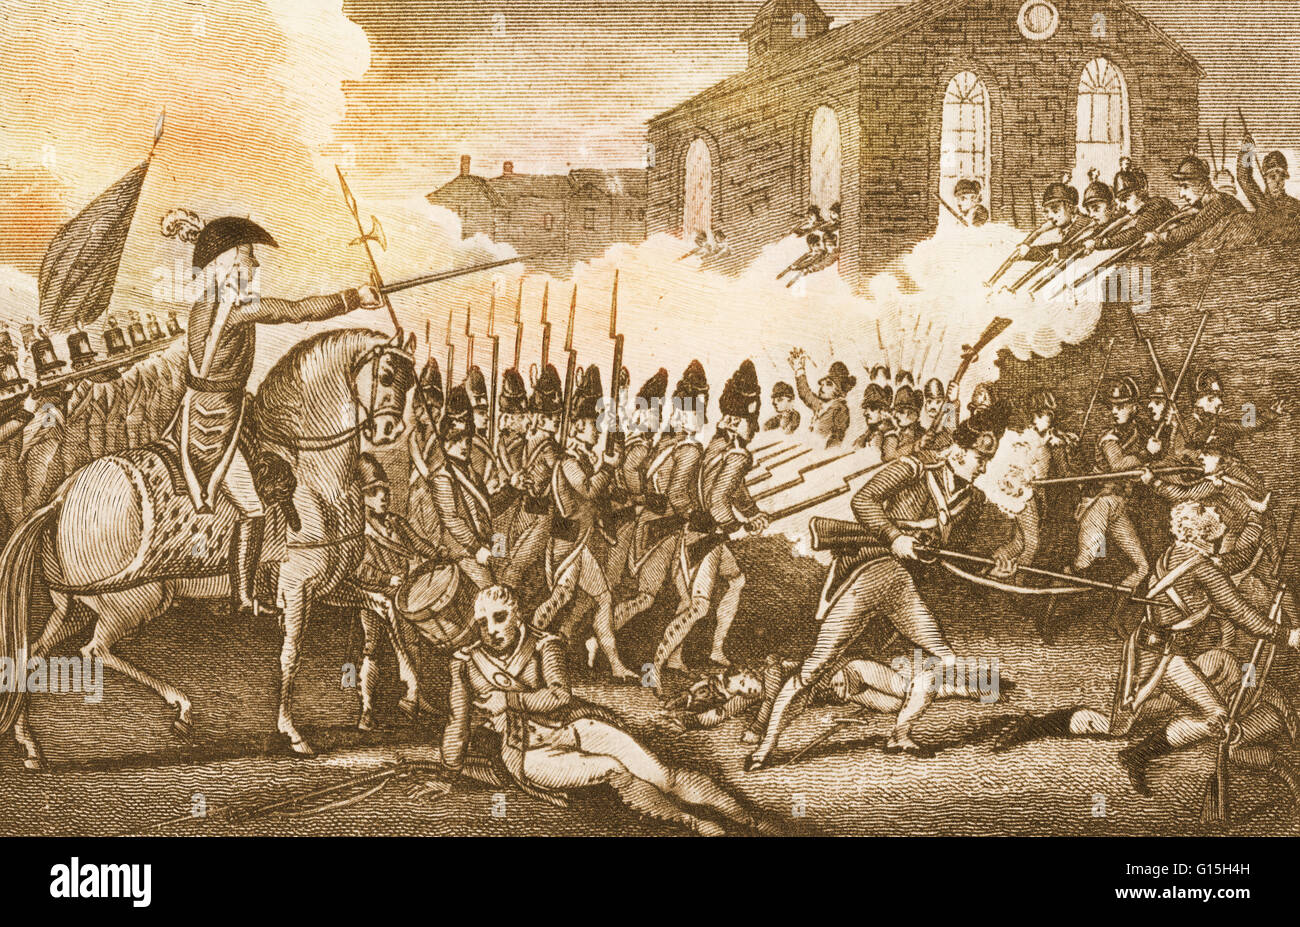 Battle of Concord. The Battles of Lexington and Concord, fought on April 19, 1775, were the first military engagements of the American Revolutionary War. The battles marked the outbreak of open armed conflict between the Kingdom of Great Britain and its t Stock Photo